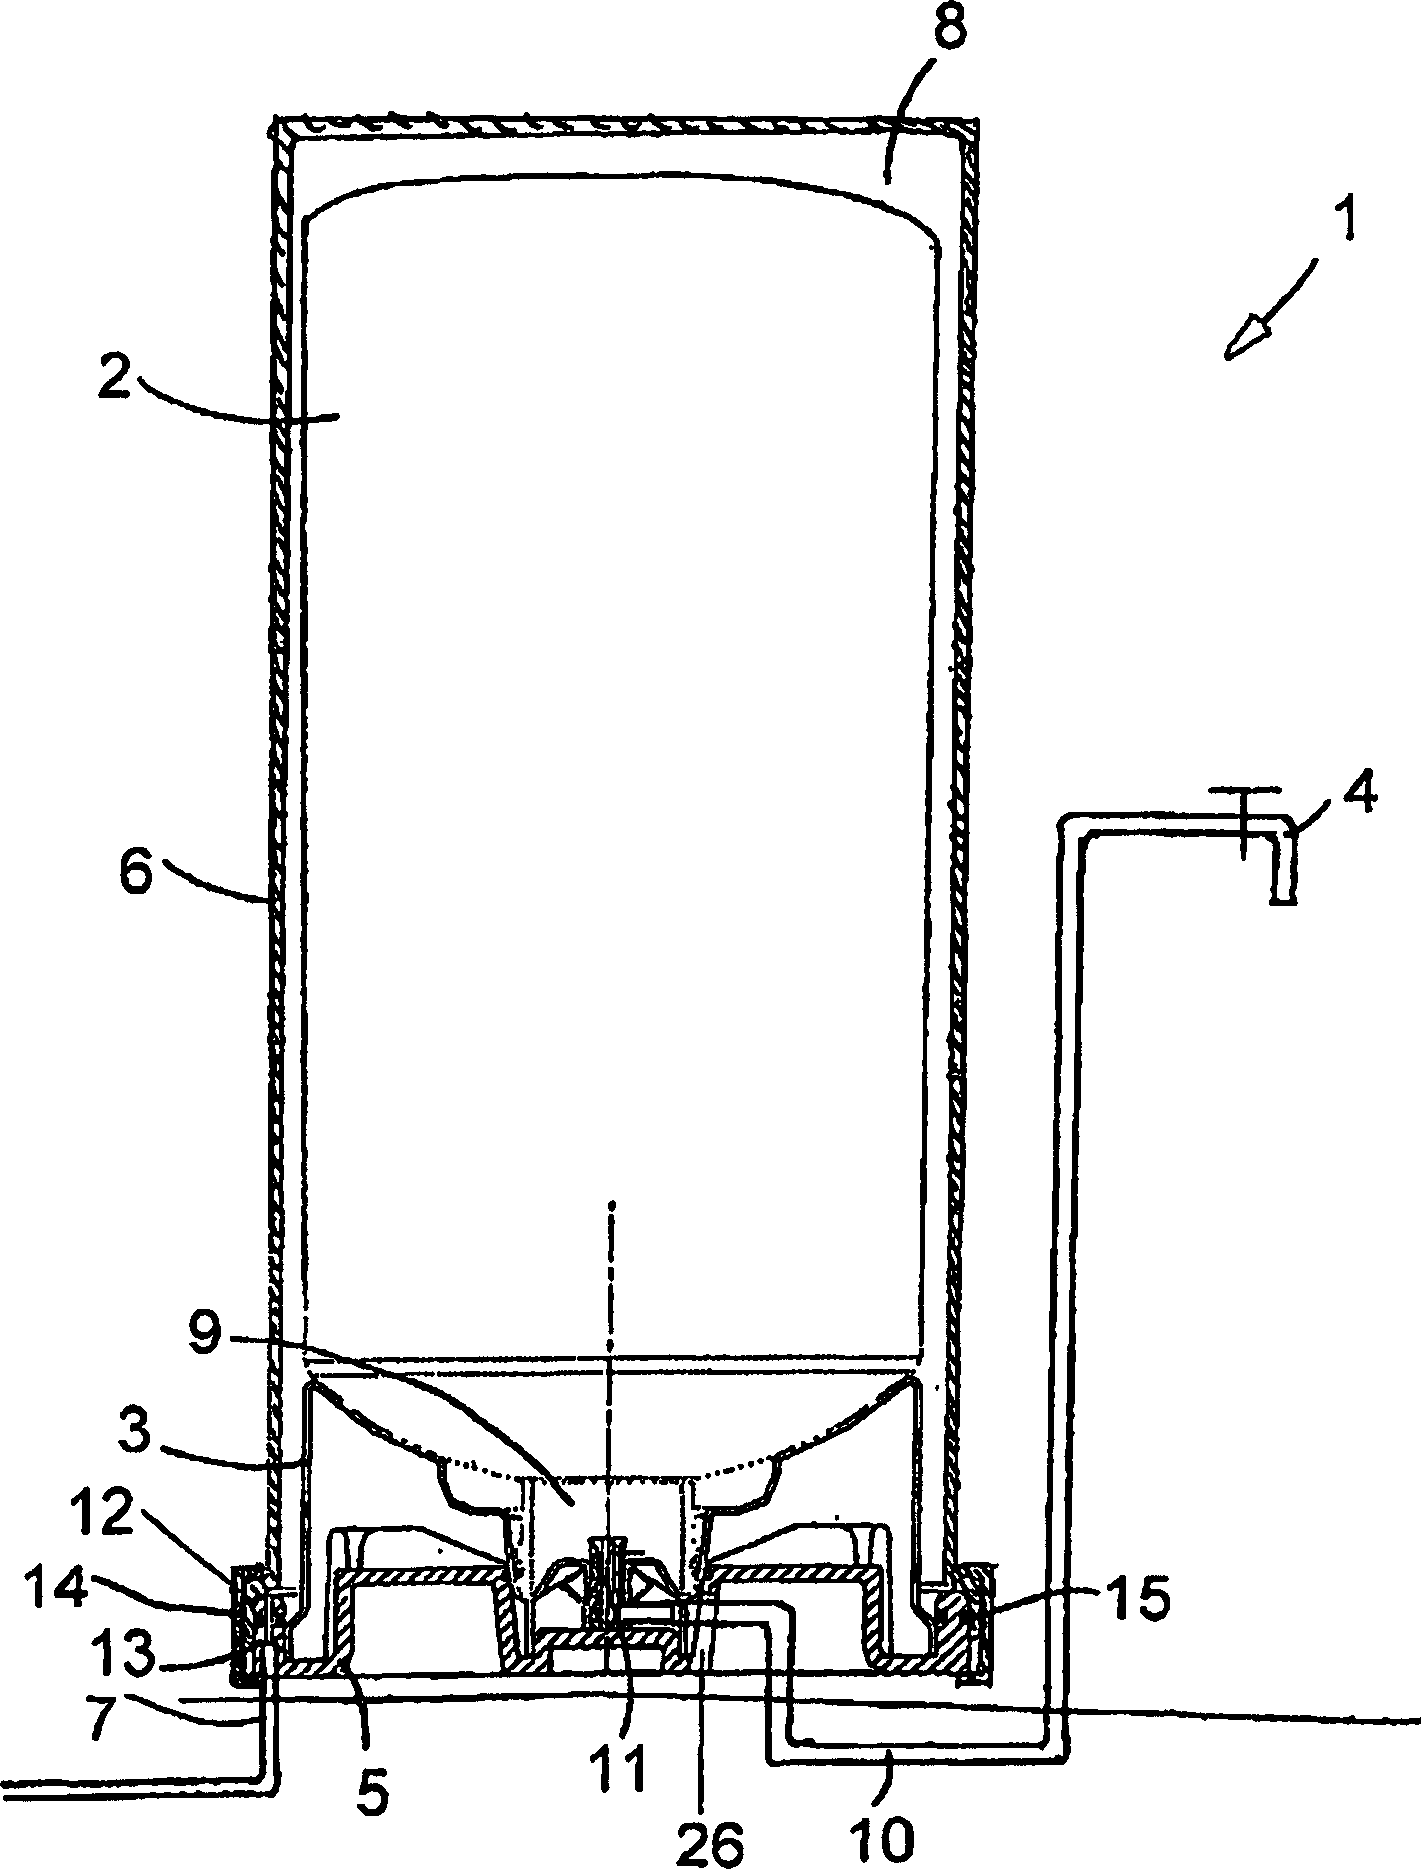 A method for dispensing a beverage and devices therefor